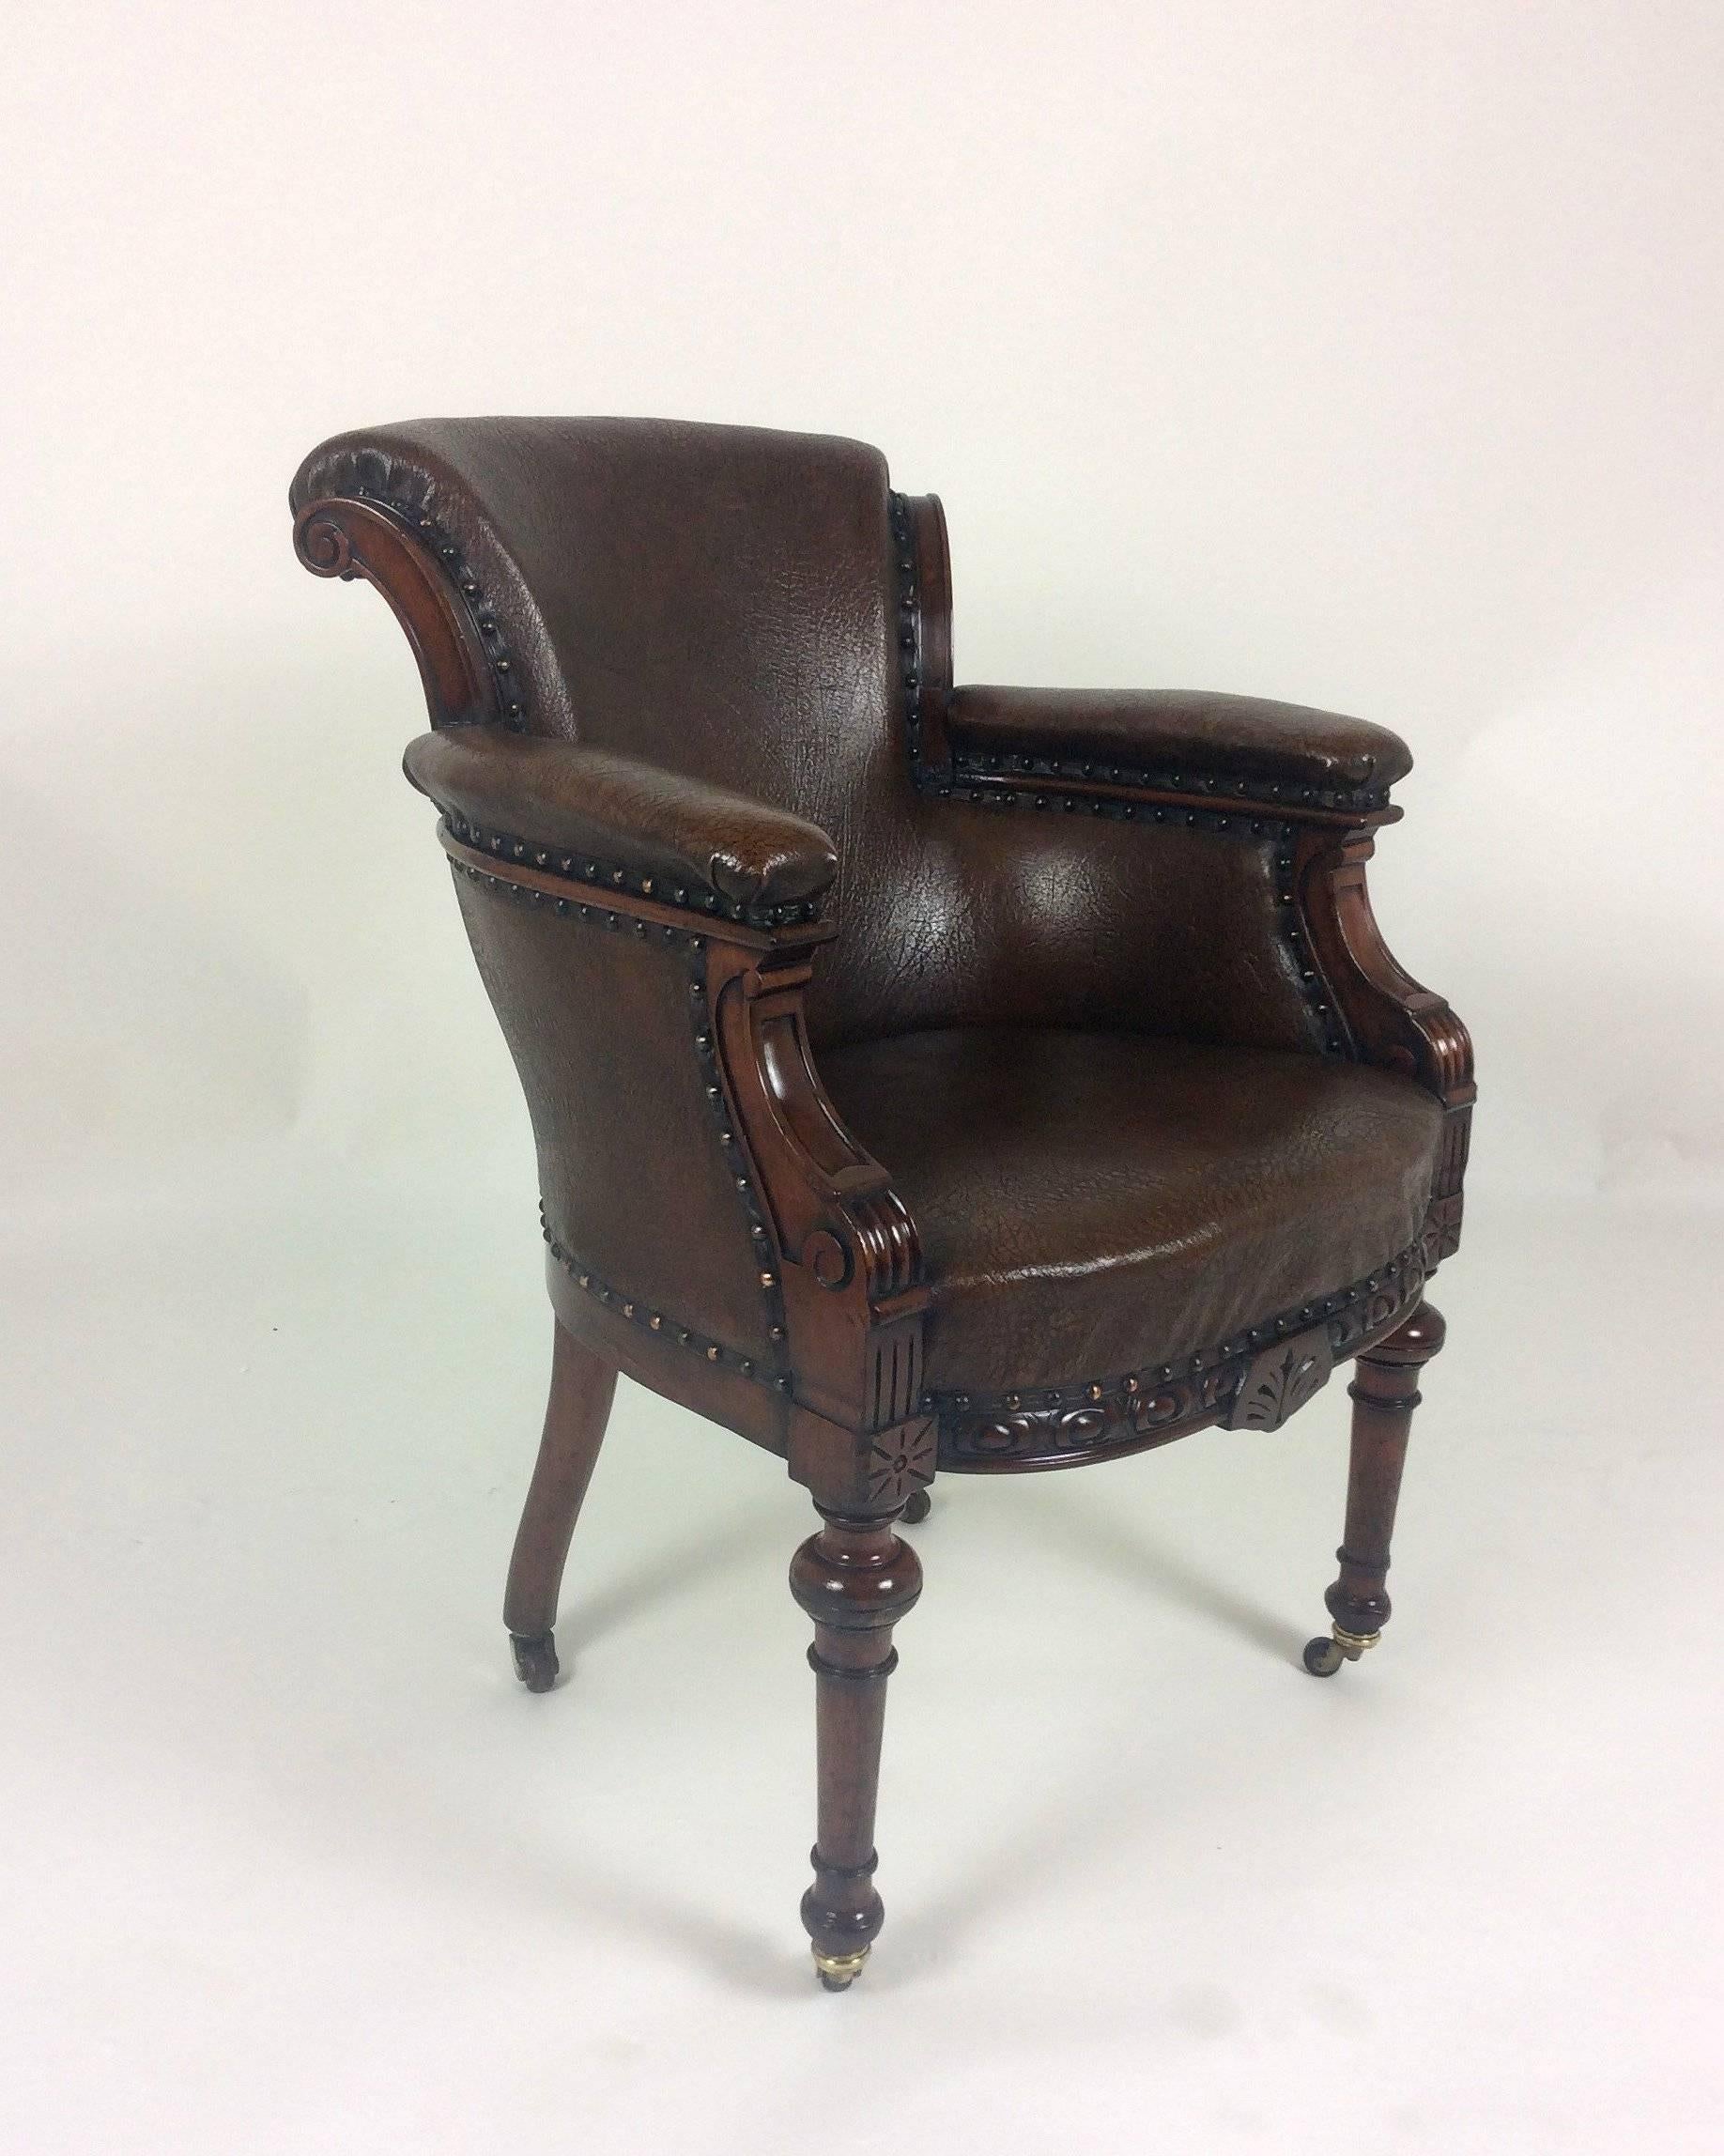 This very handsome Victorian mahogany desk chair is upholstered in rich dark brown textured leather with brass metal stud detailing. The chair measures 24 in – 61 cm wide, 29 in – 73.7 cm deep and 34 in – 86.3 cm in height, with a chair seat height